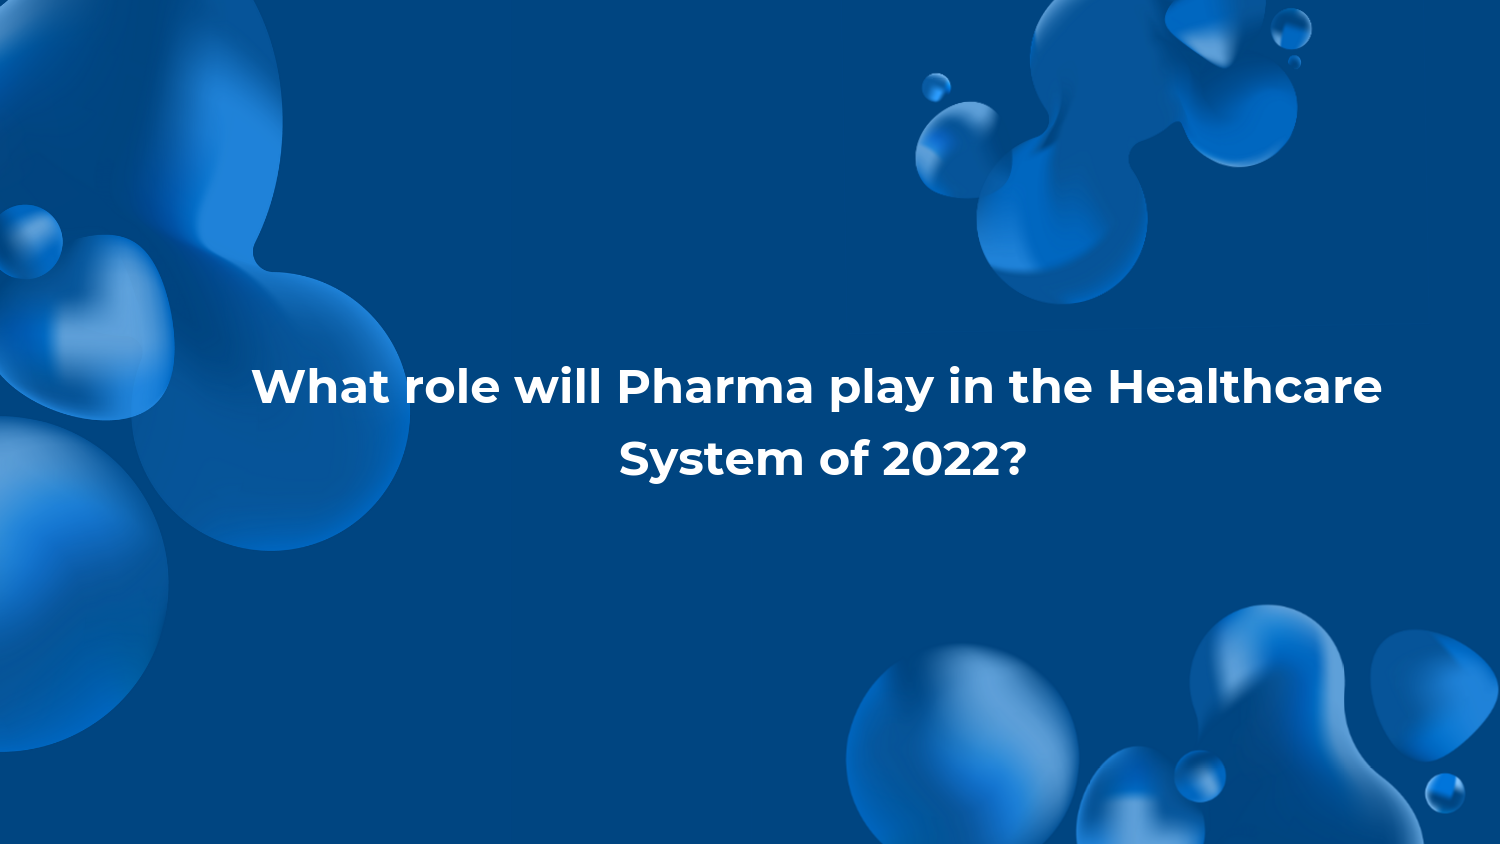 What role will Pharma play in the Healthcare System of 2022?